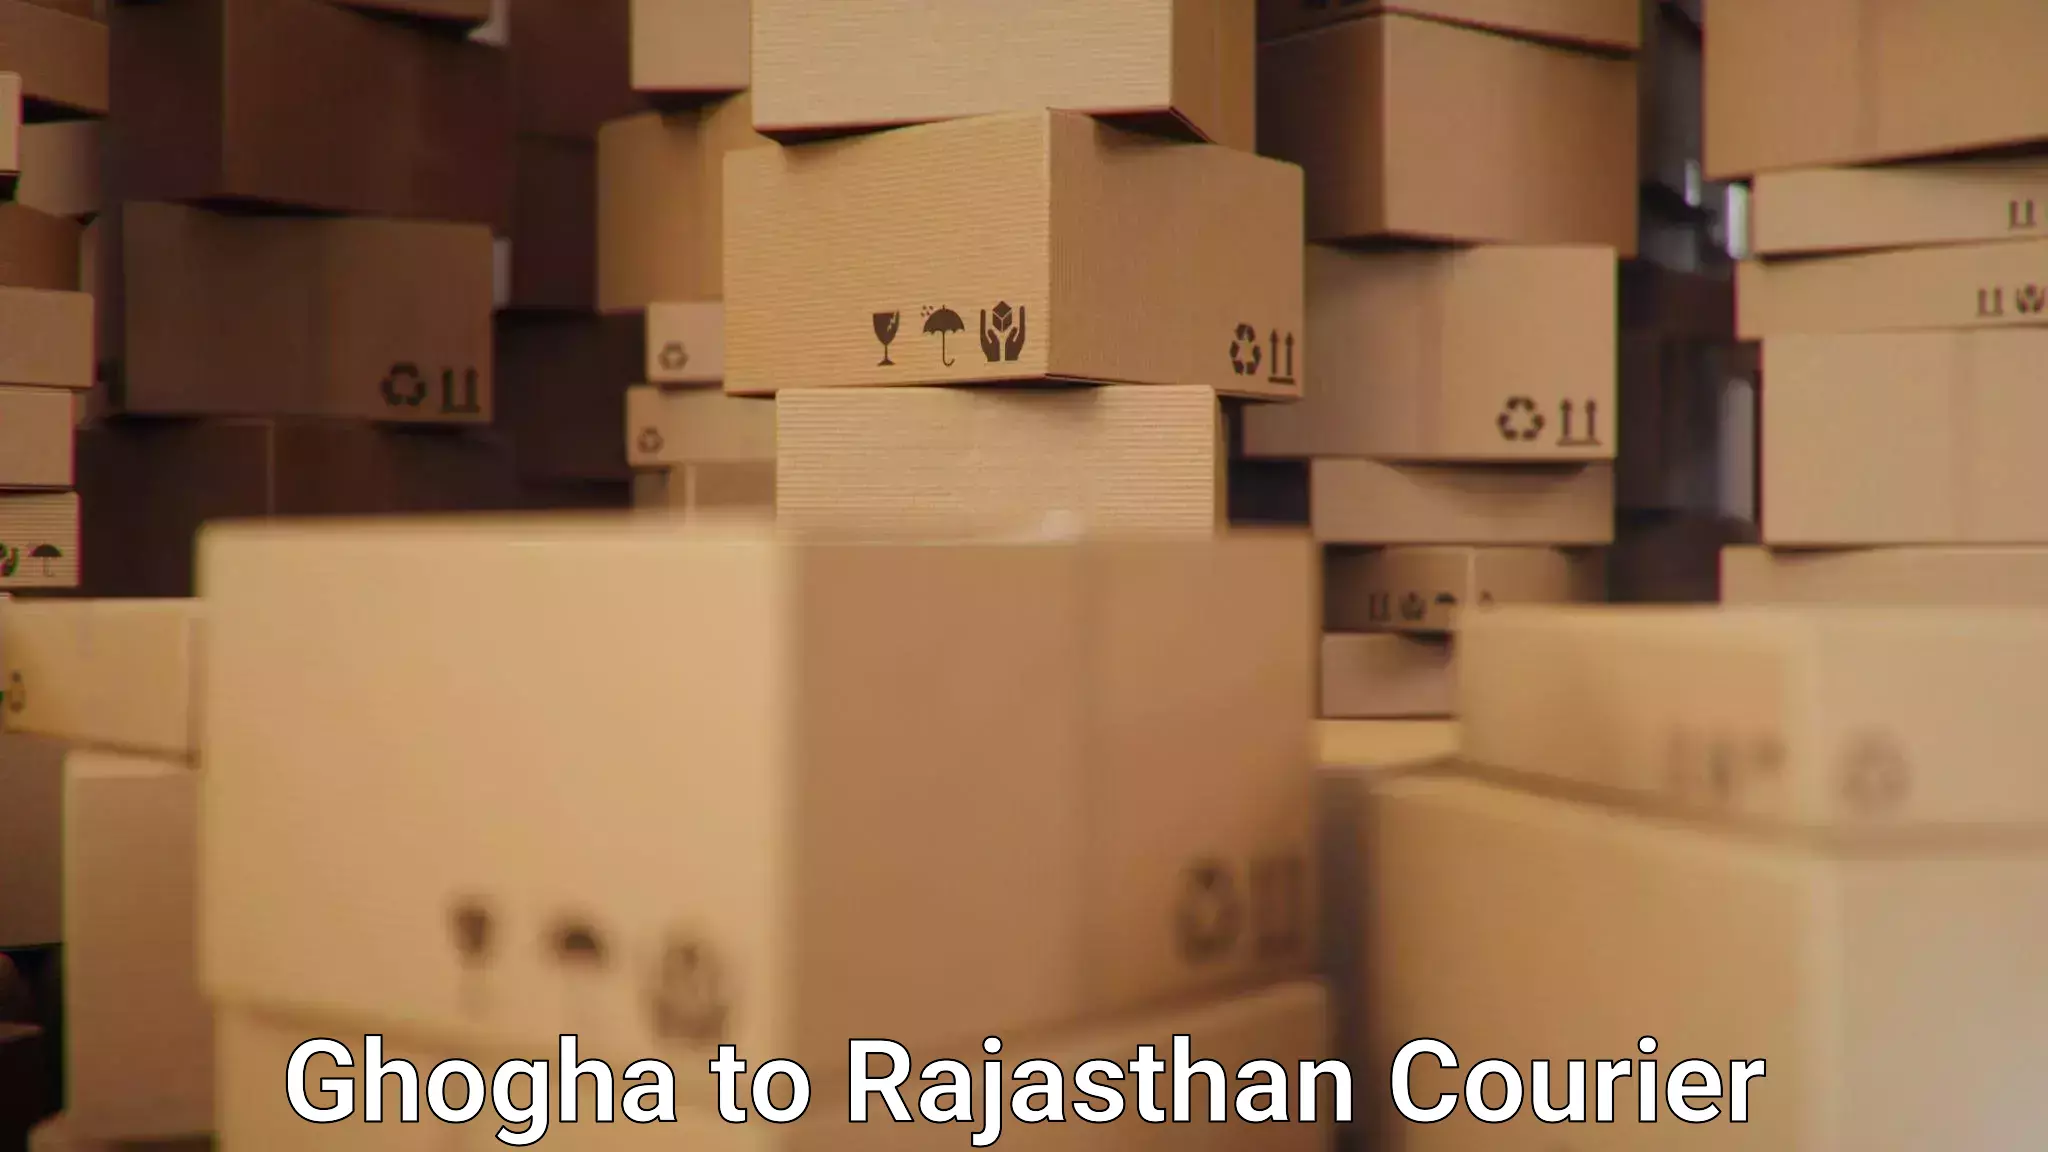 Flexible delivery schedules Ghogha to Rajasthan